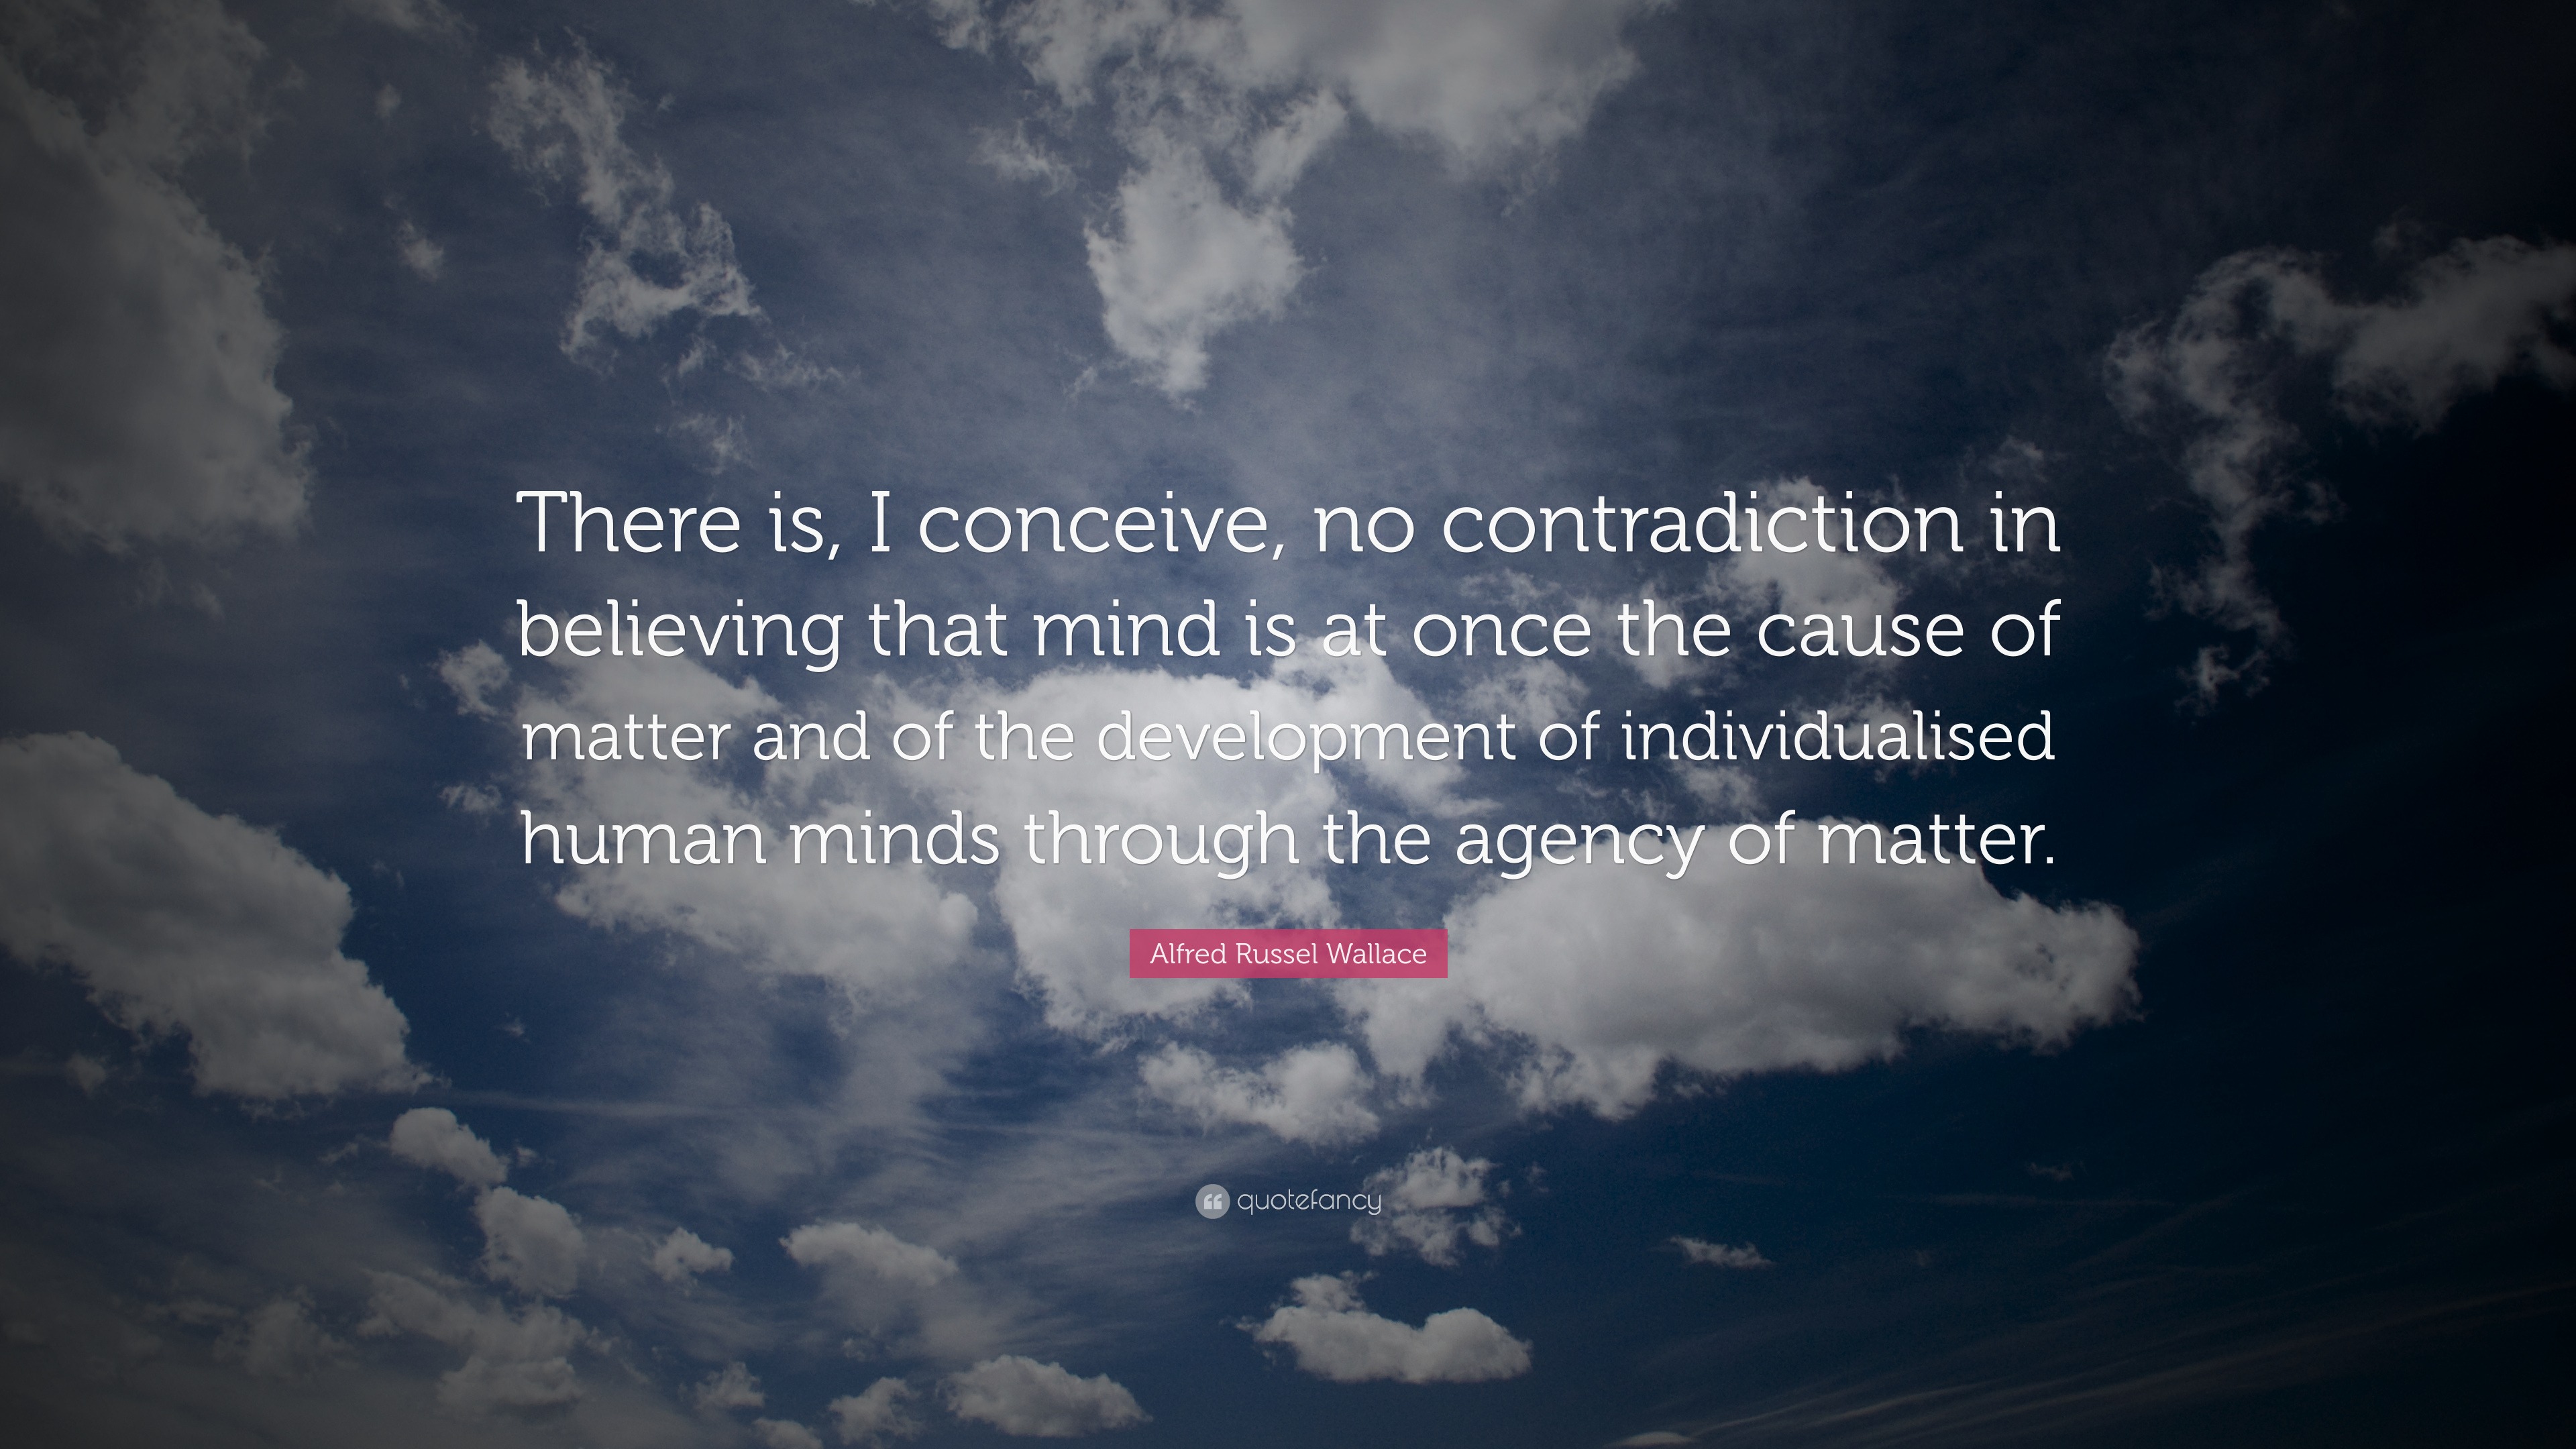 Alfred Russel Wallace Quote There Is I Conceive No Contradiction In Believing That Mind Is At Once The Cause Of Matter And Of The Development Of I 7 Wallpapers Quotefancy